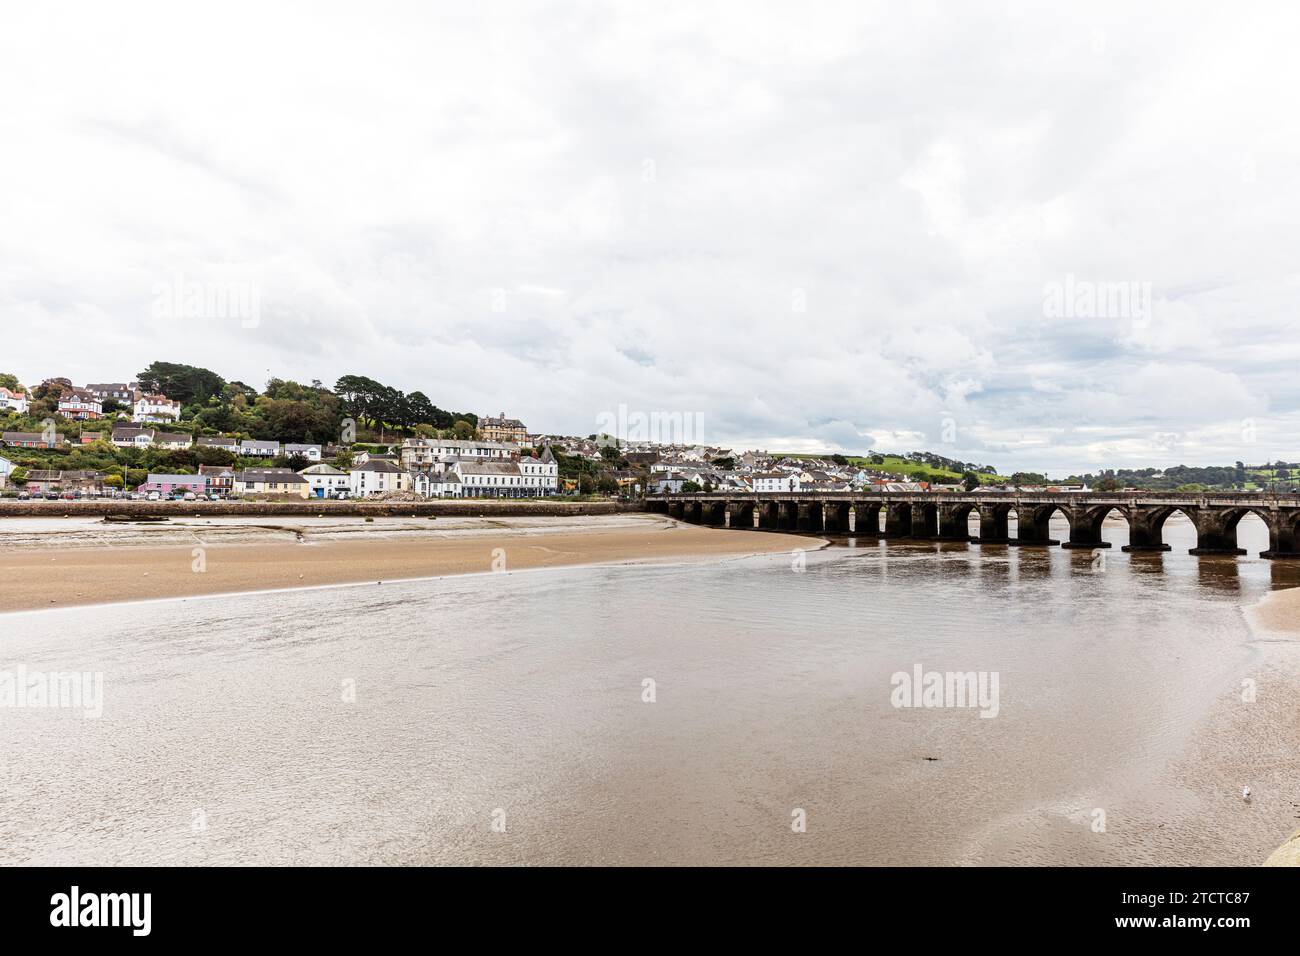 Bideford Long Bridge in North Devon spans the River Torridge near its estuary and connects the old part of the town, Bideford Town, Devon, UK, England Stock Photo